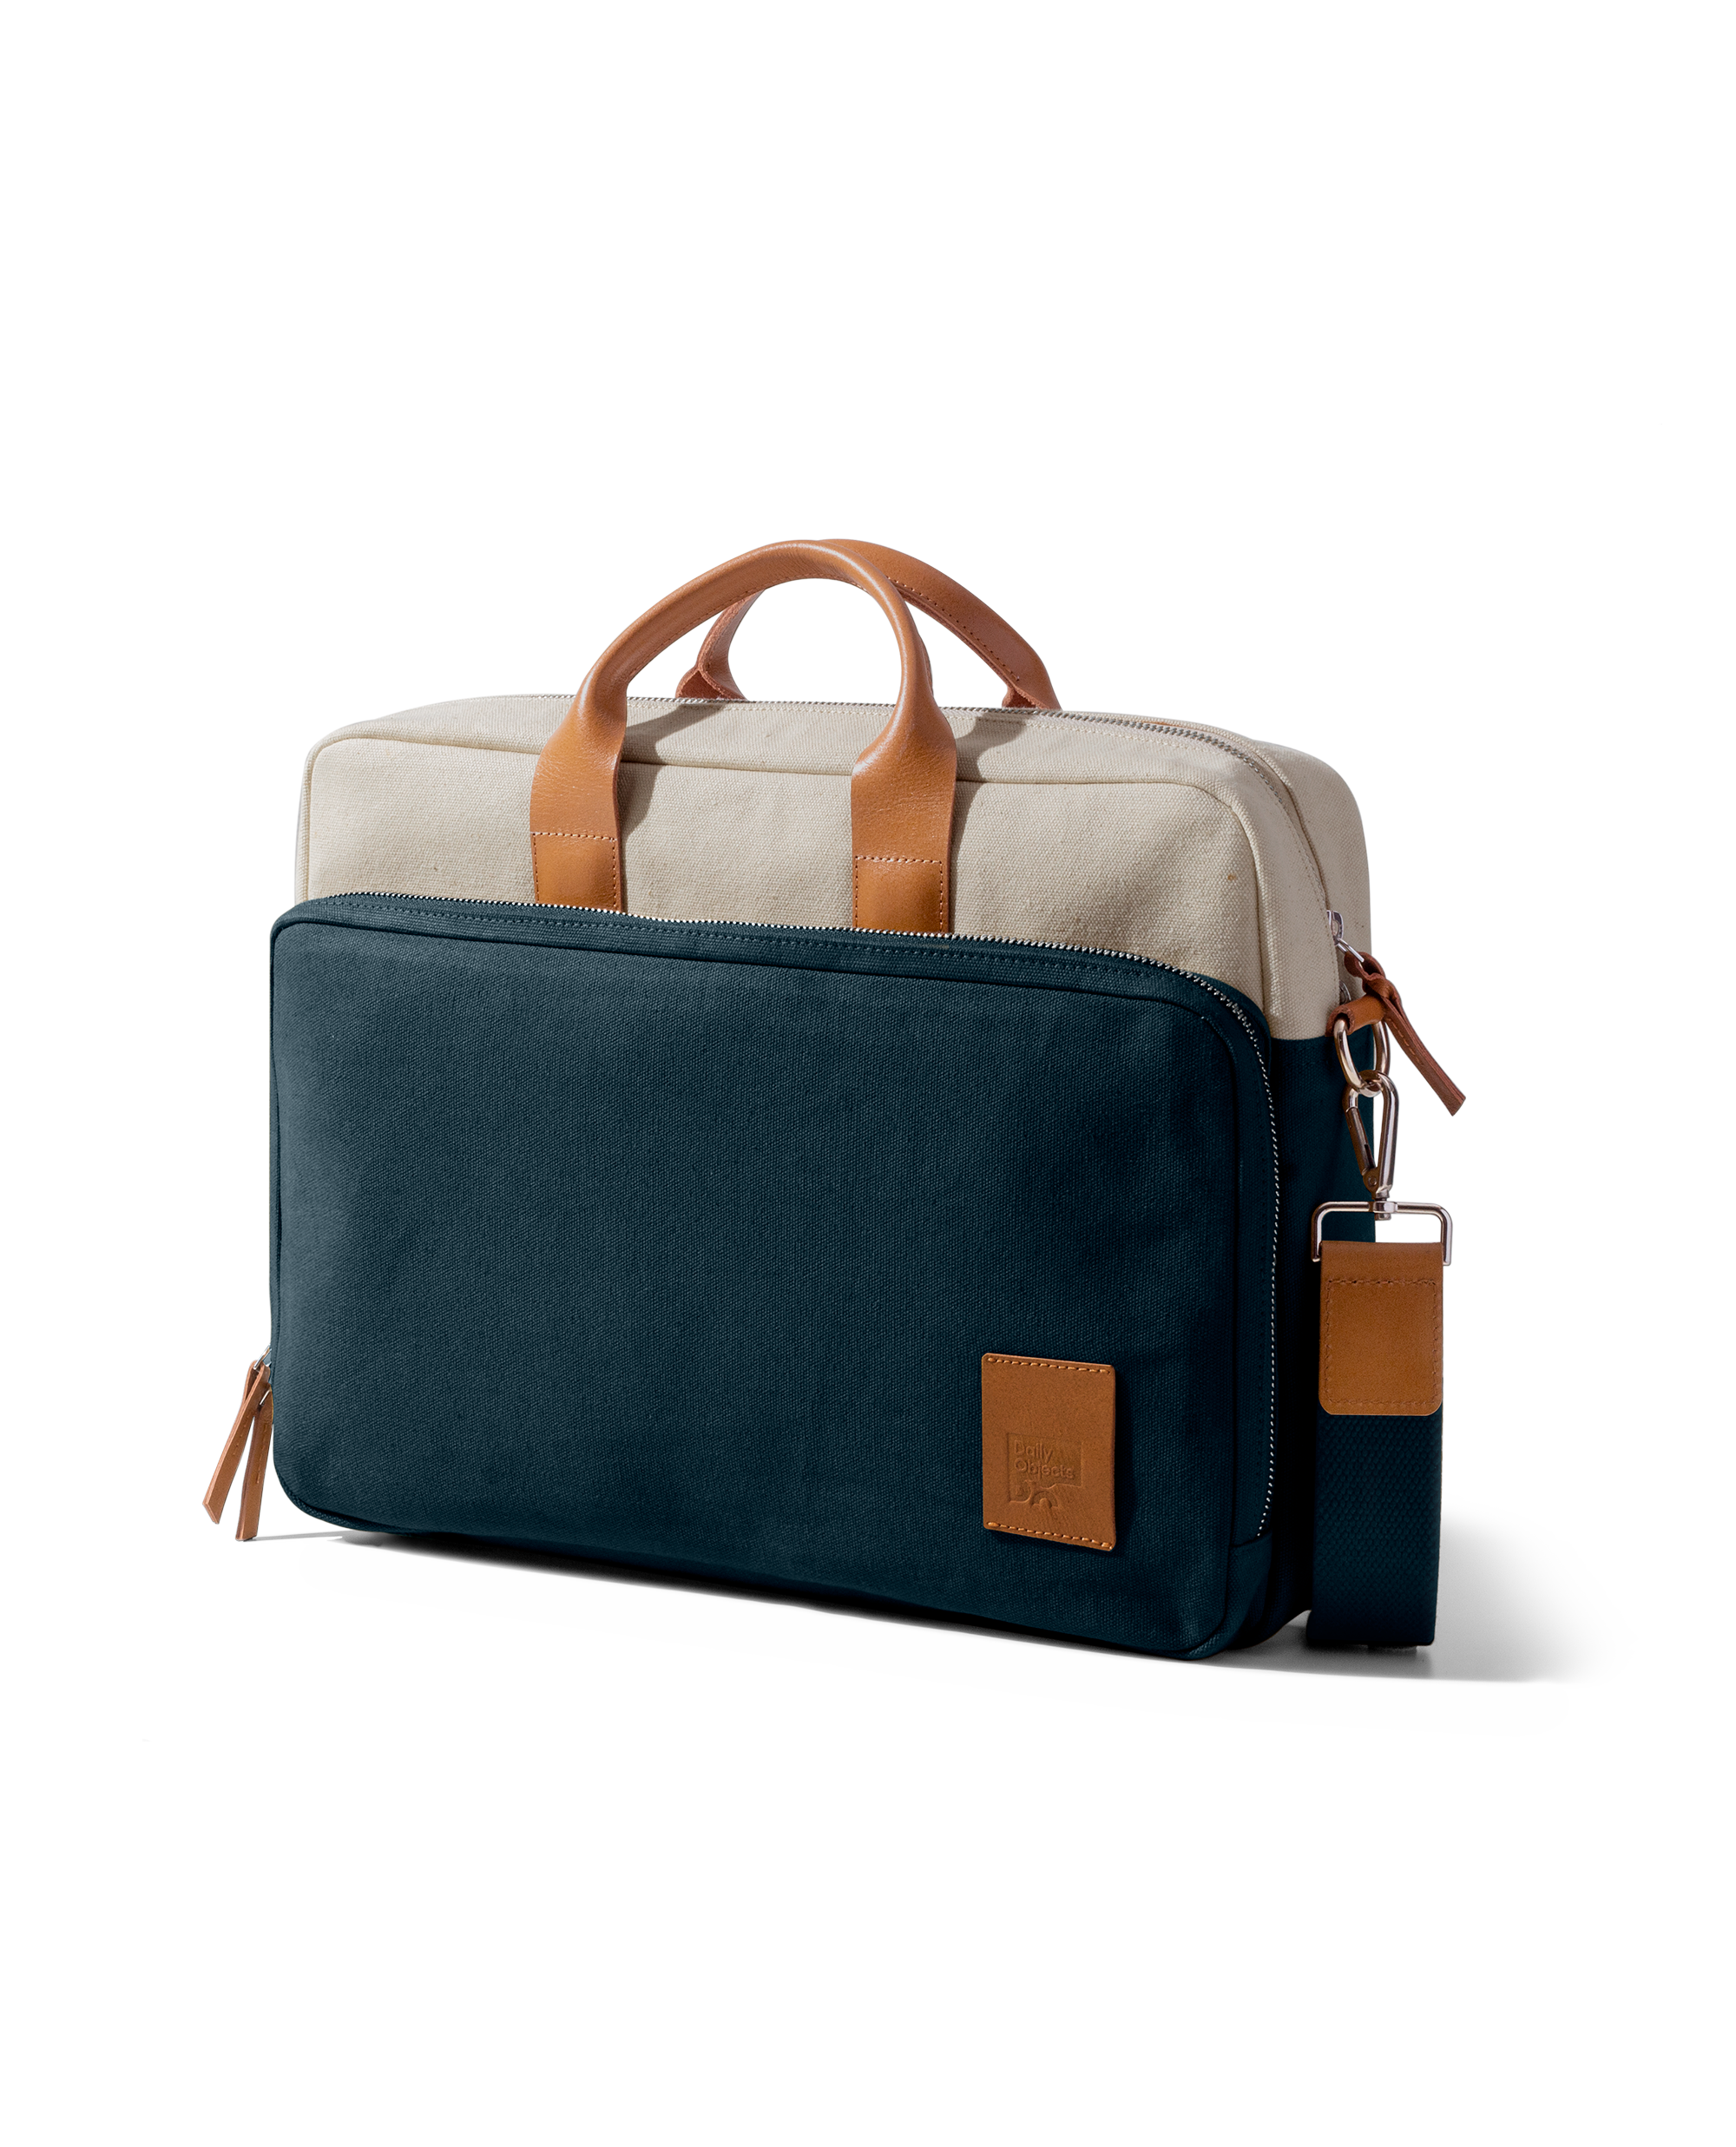 Best Laptop Bags for men: 7 Best Laptop Bags for Men to Look Stylish and  Professional - The Economic Times